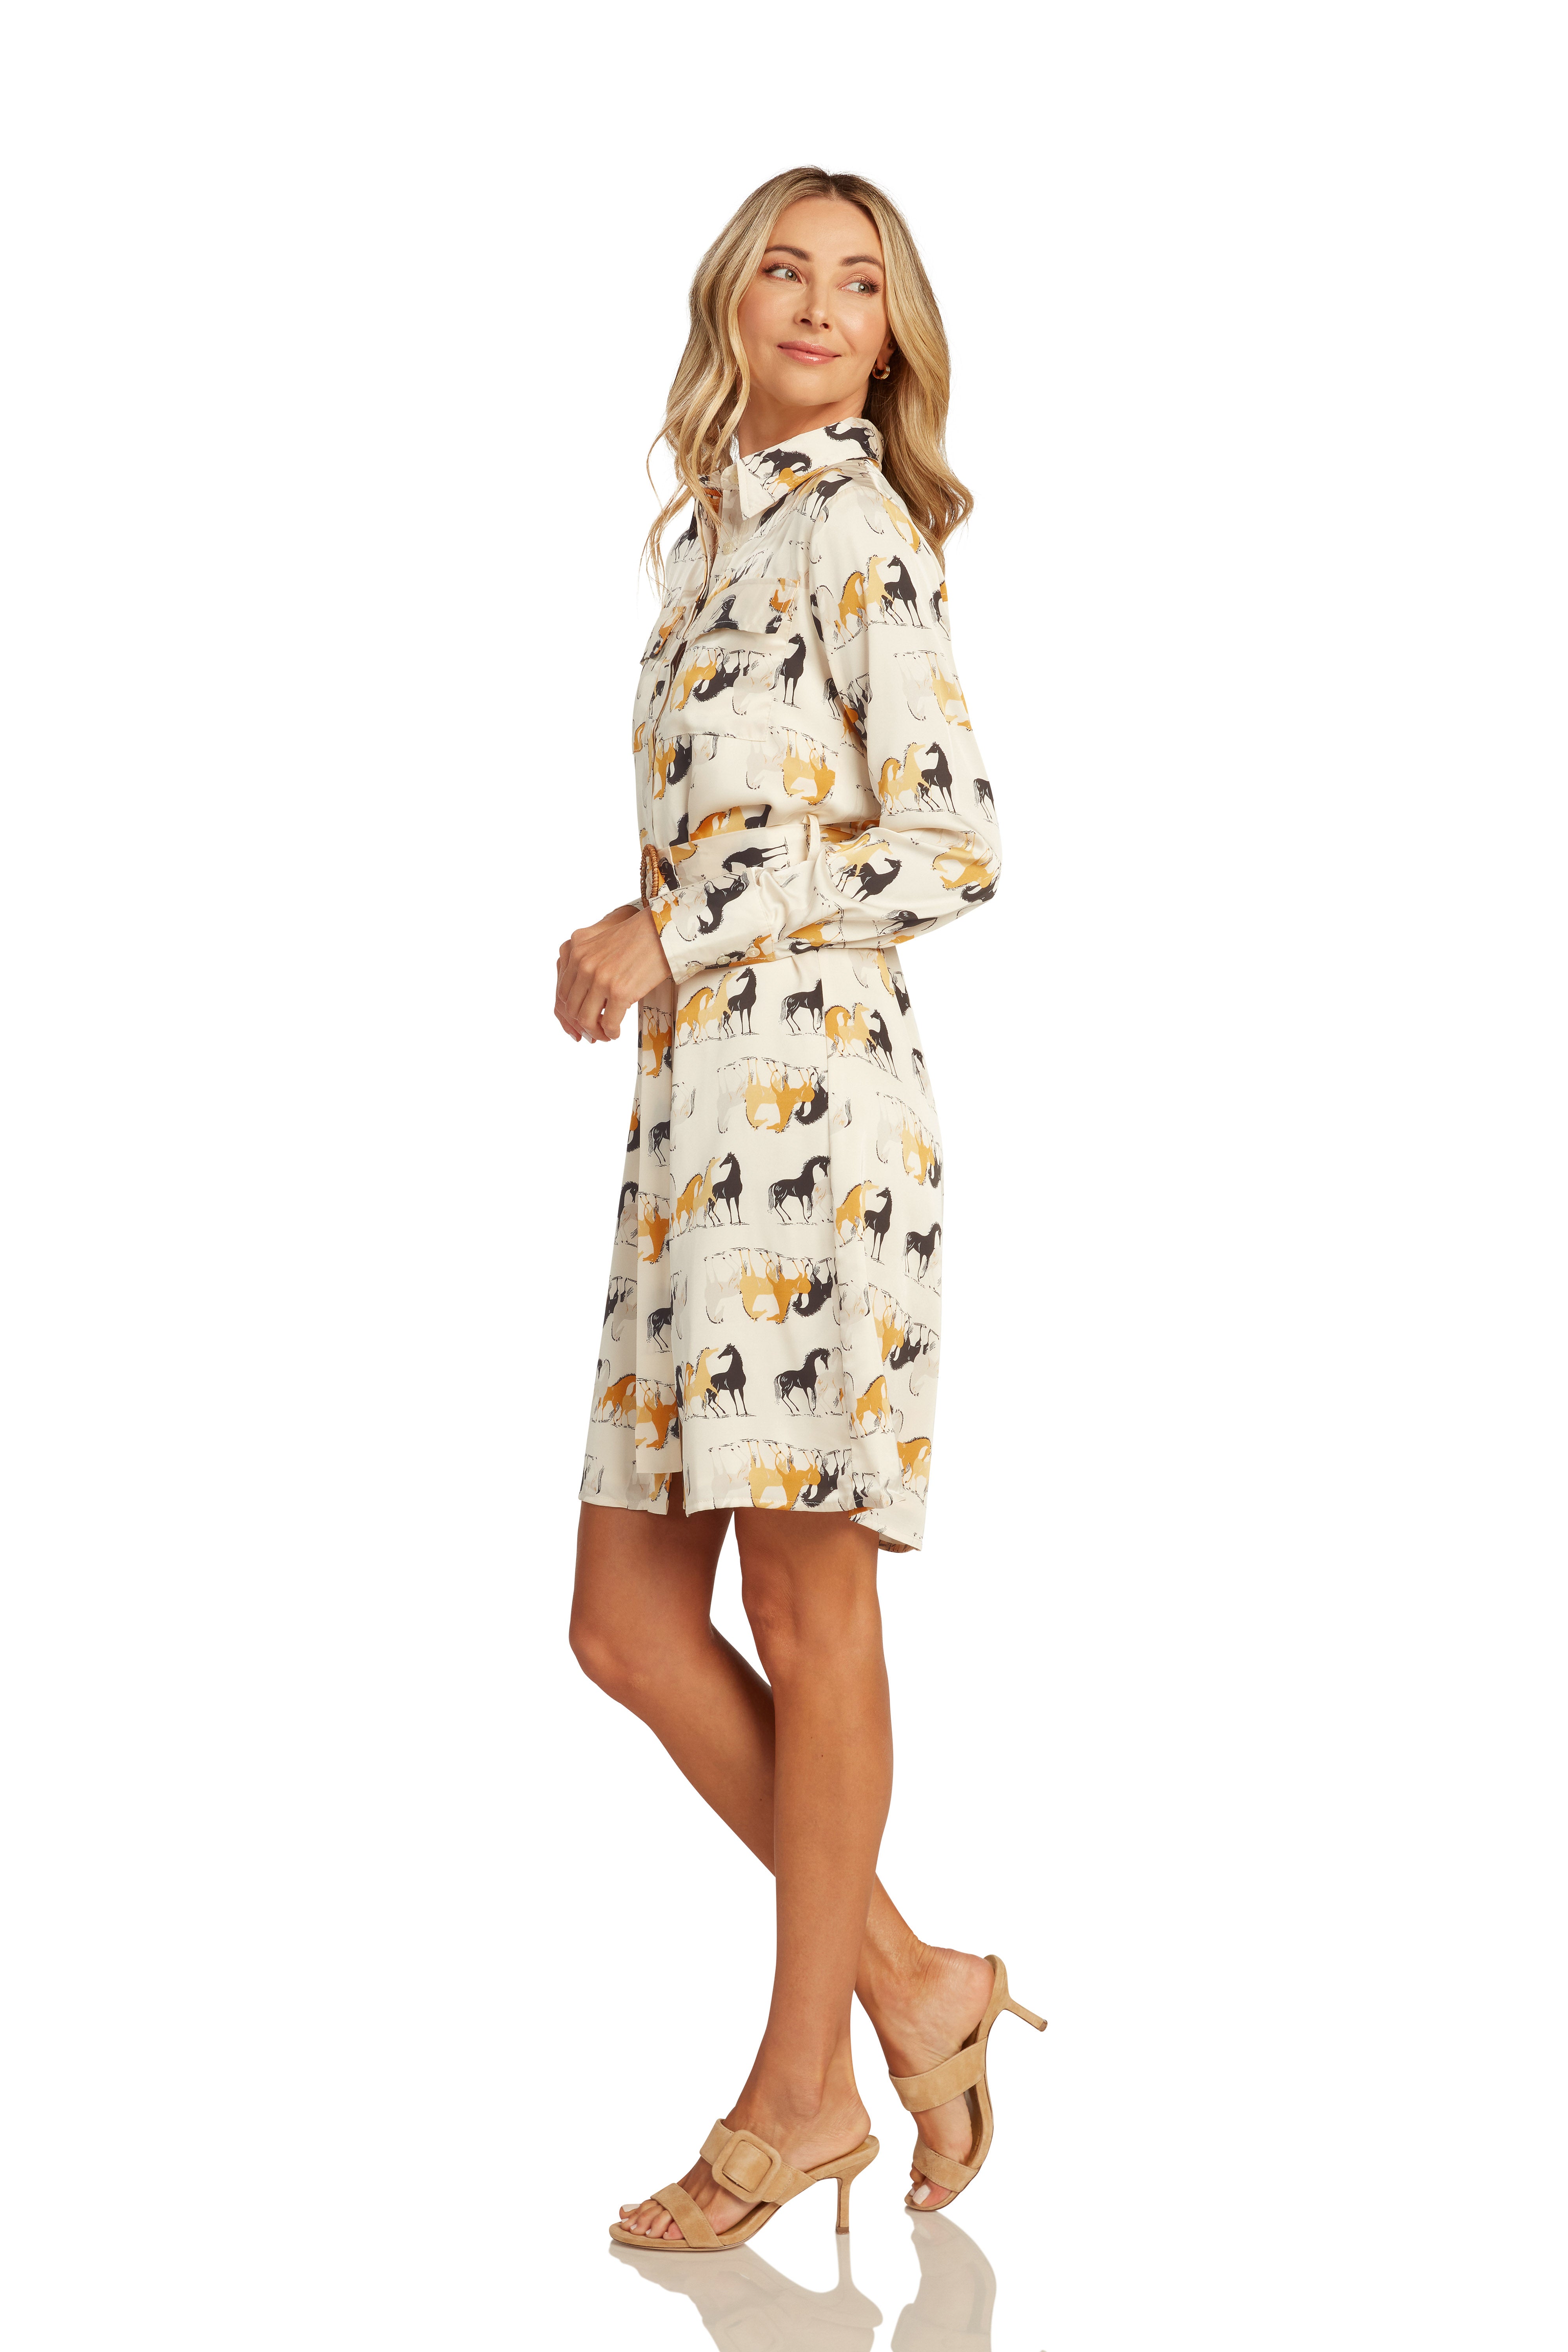 $99.99 DRESS EVENT BLAKESLEY BUTTON FRONT DRESS-PONY